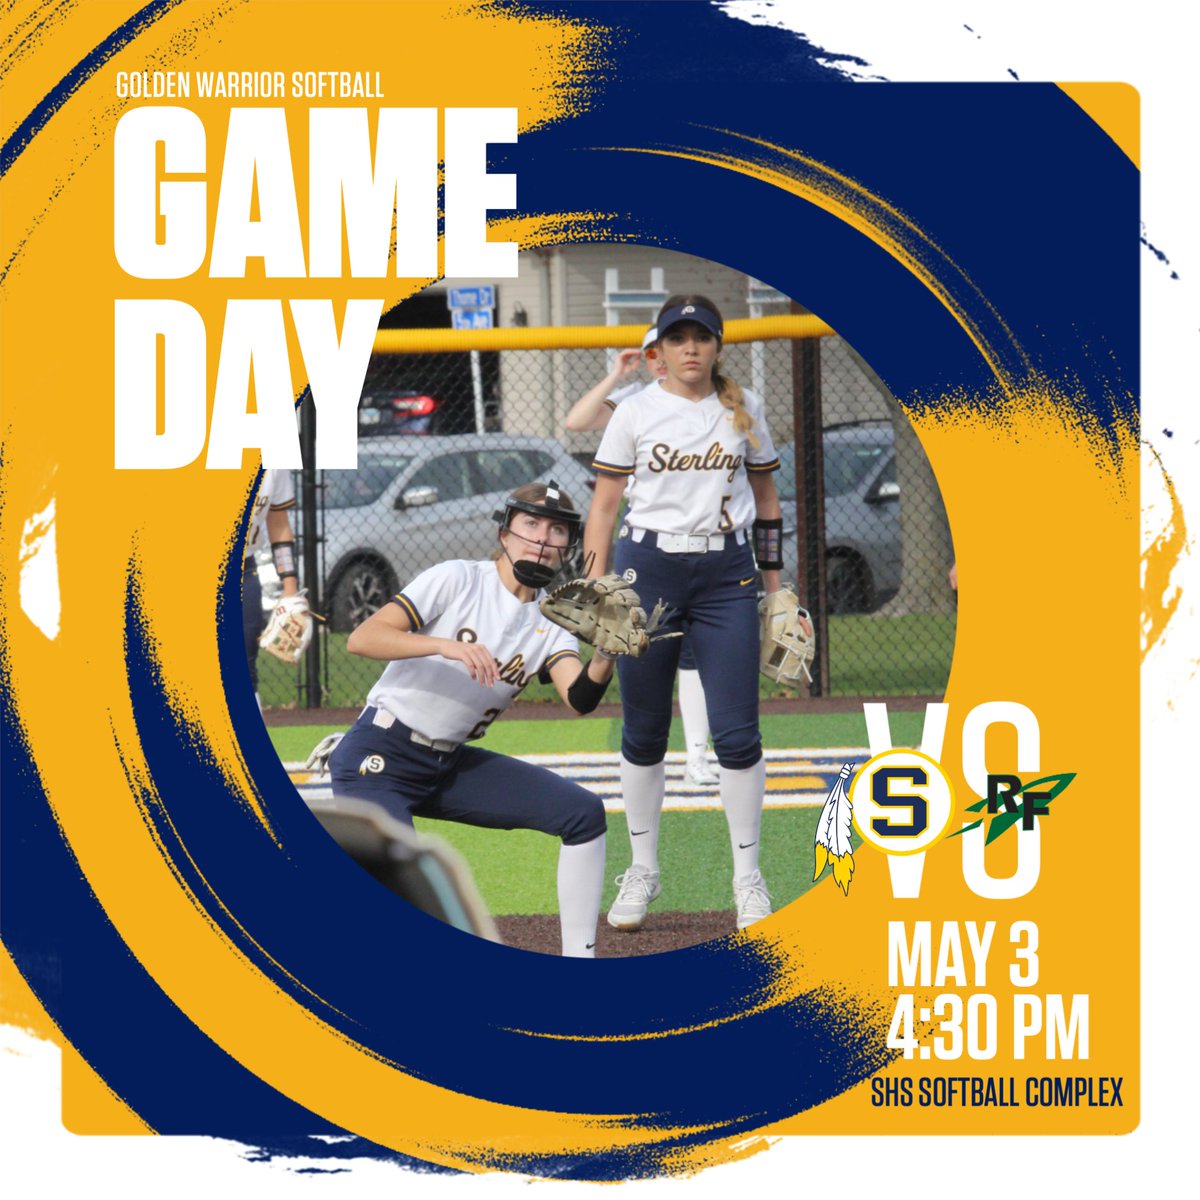 It’s a 🌞BEAUTIFUL🌞 day and🥎 is on the home turf to battle the Lady Rockets! ➡️Sterling (16-3) Vs. Rock Falls (11-13) 📱Digital Program: bit.ly/softball_shs 📺GoldenWarriorTV.org Let’s #GOldenWARRIORS! #BeatRockFalls!